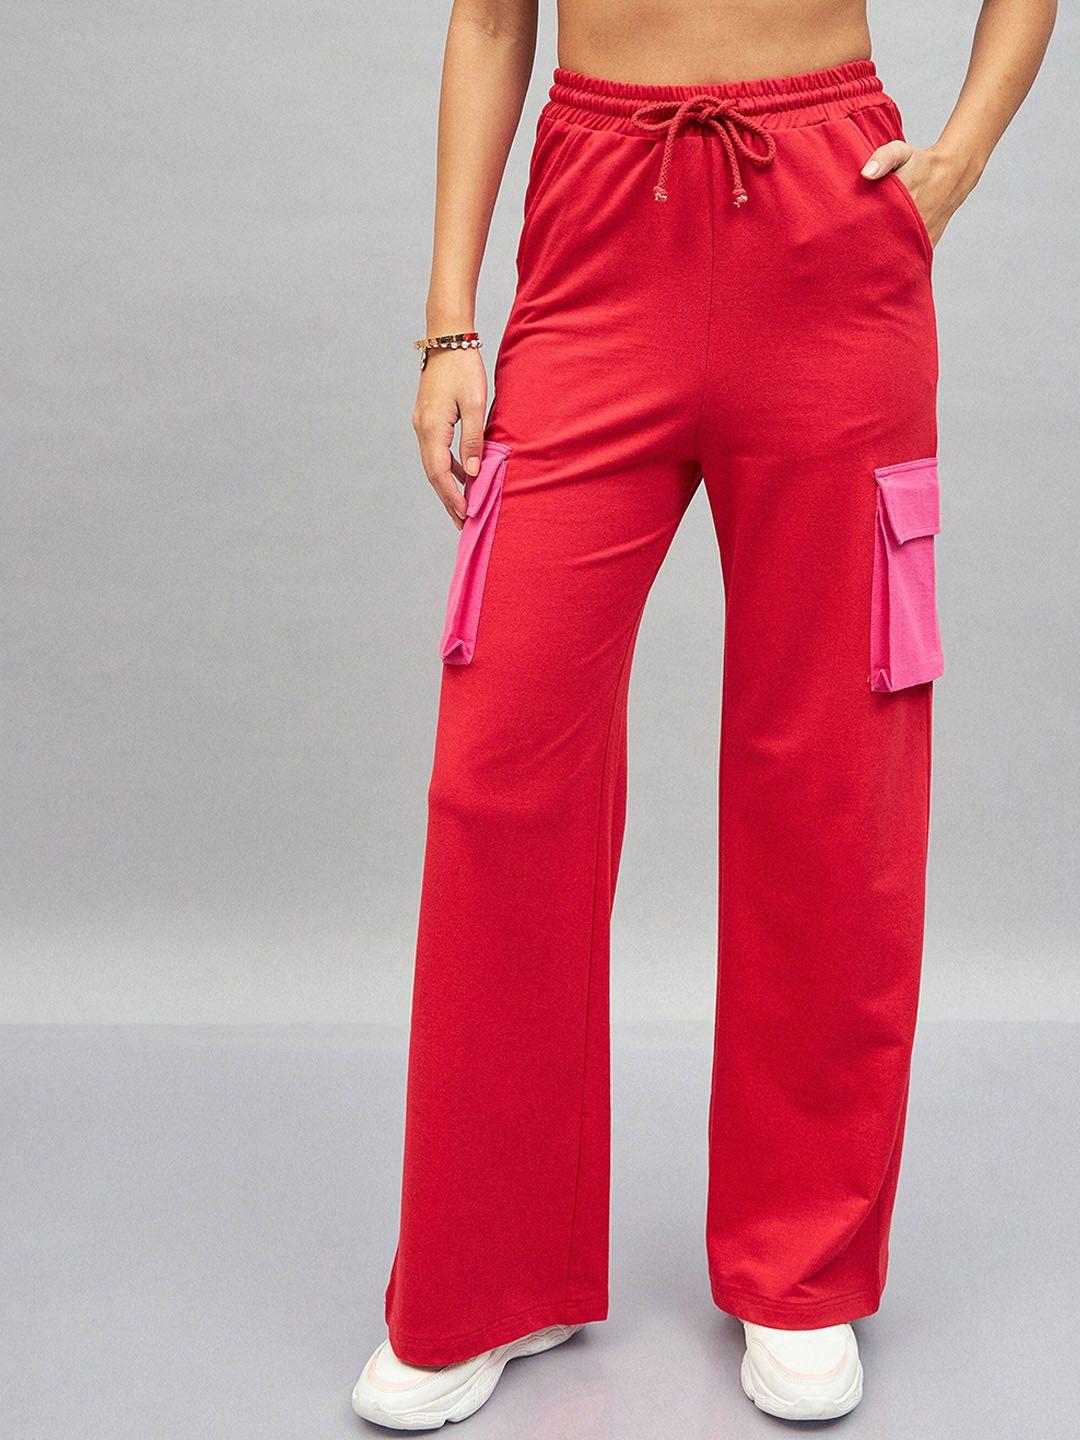 sassafras-red-women-contrast-pockets-straight-fit-track-pants